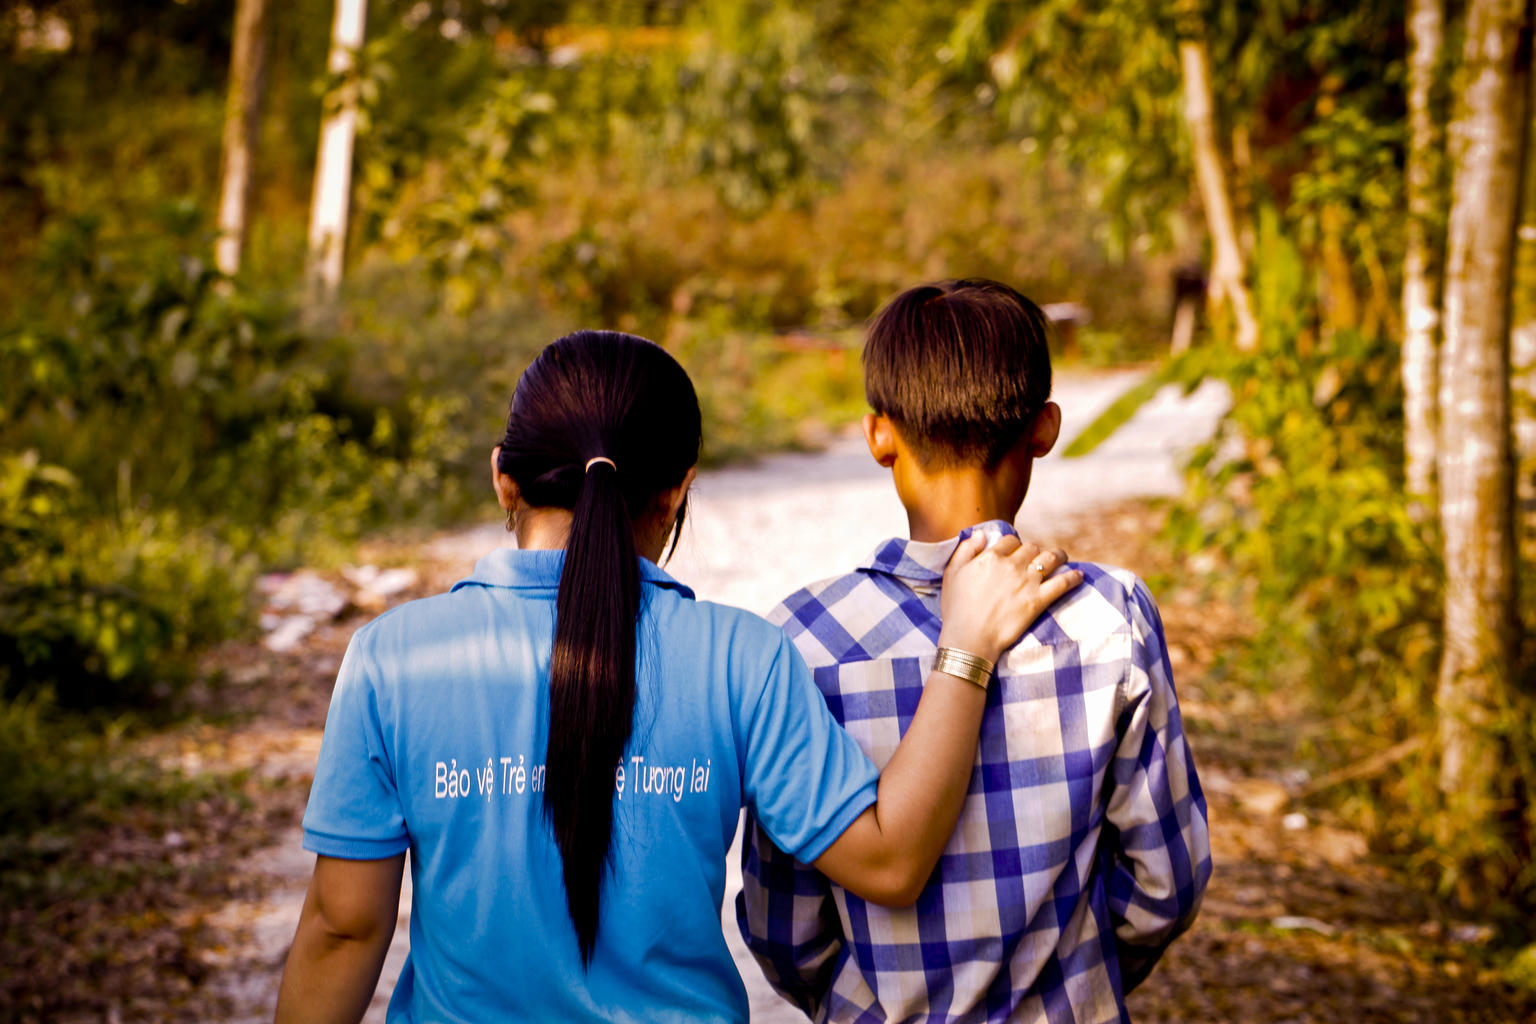 Backs of adolescent boy and girl with hand on one shoulder